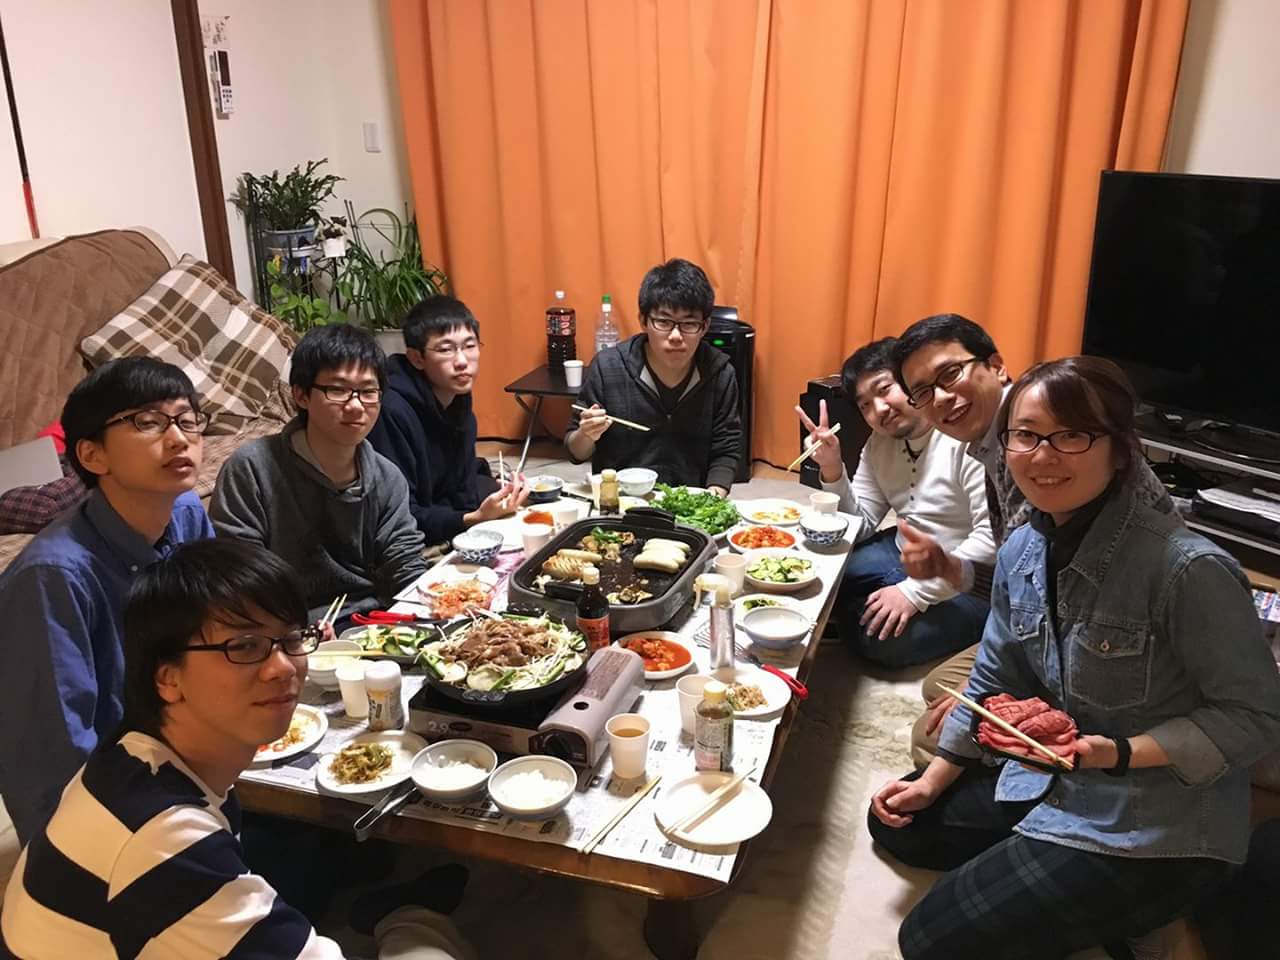 Pastor Tak and Suzuko (rightmost) sharing a meal with the youths.